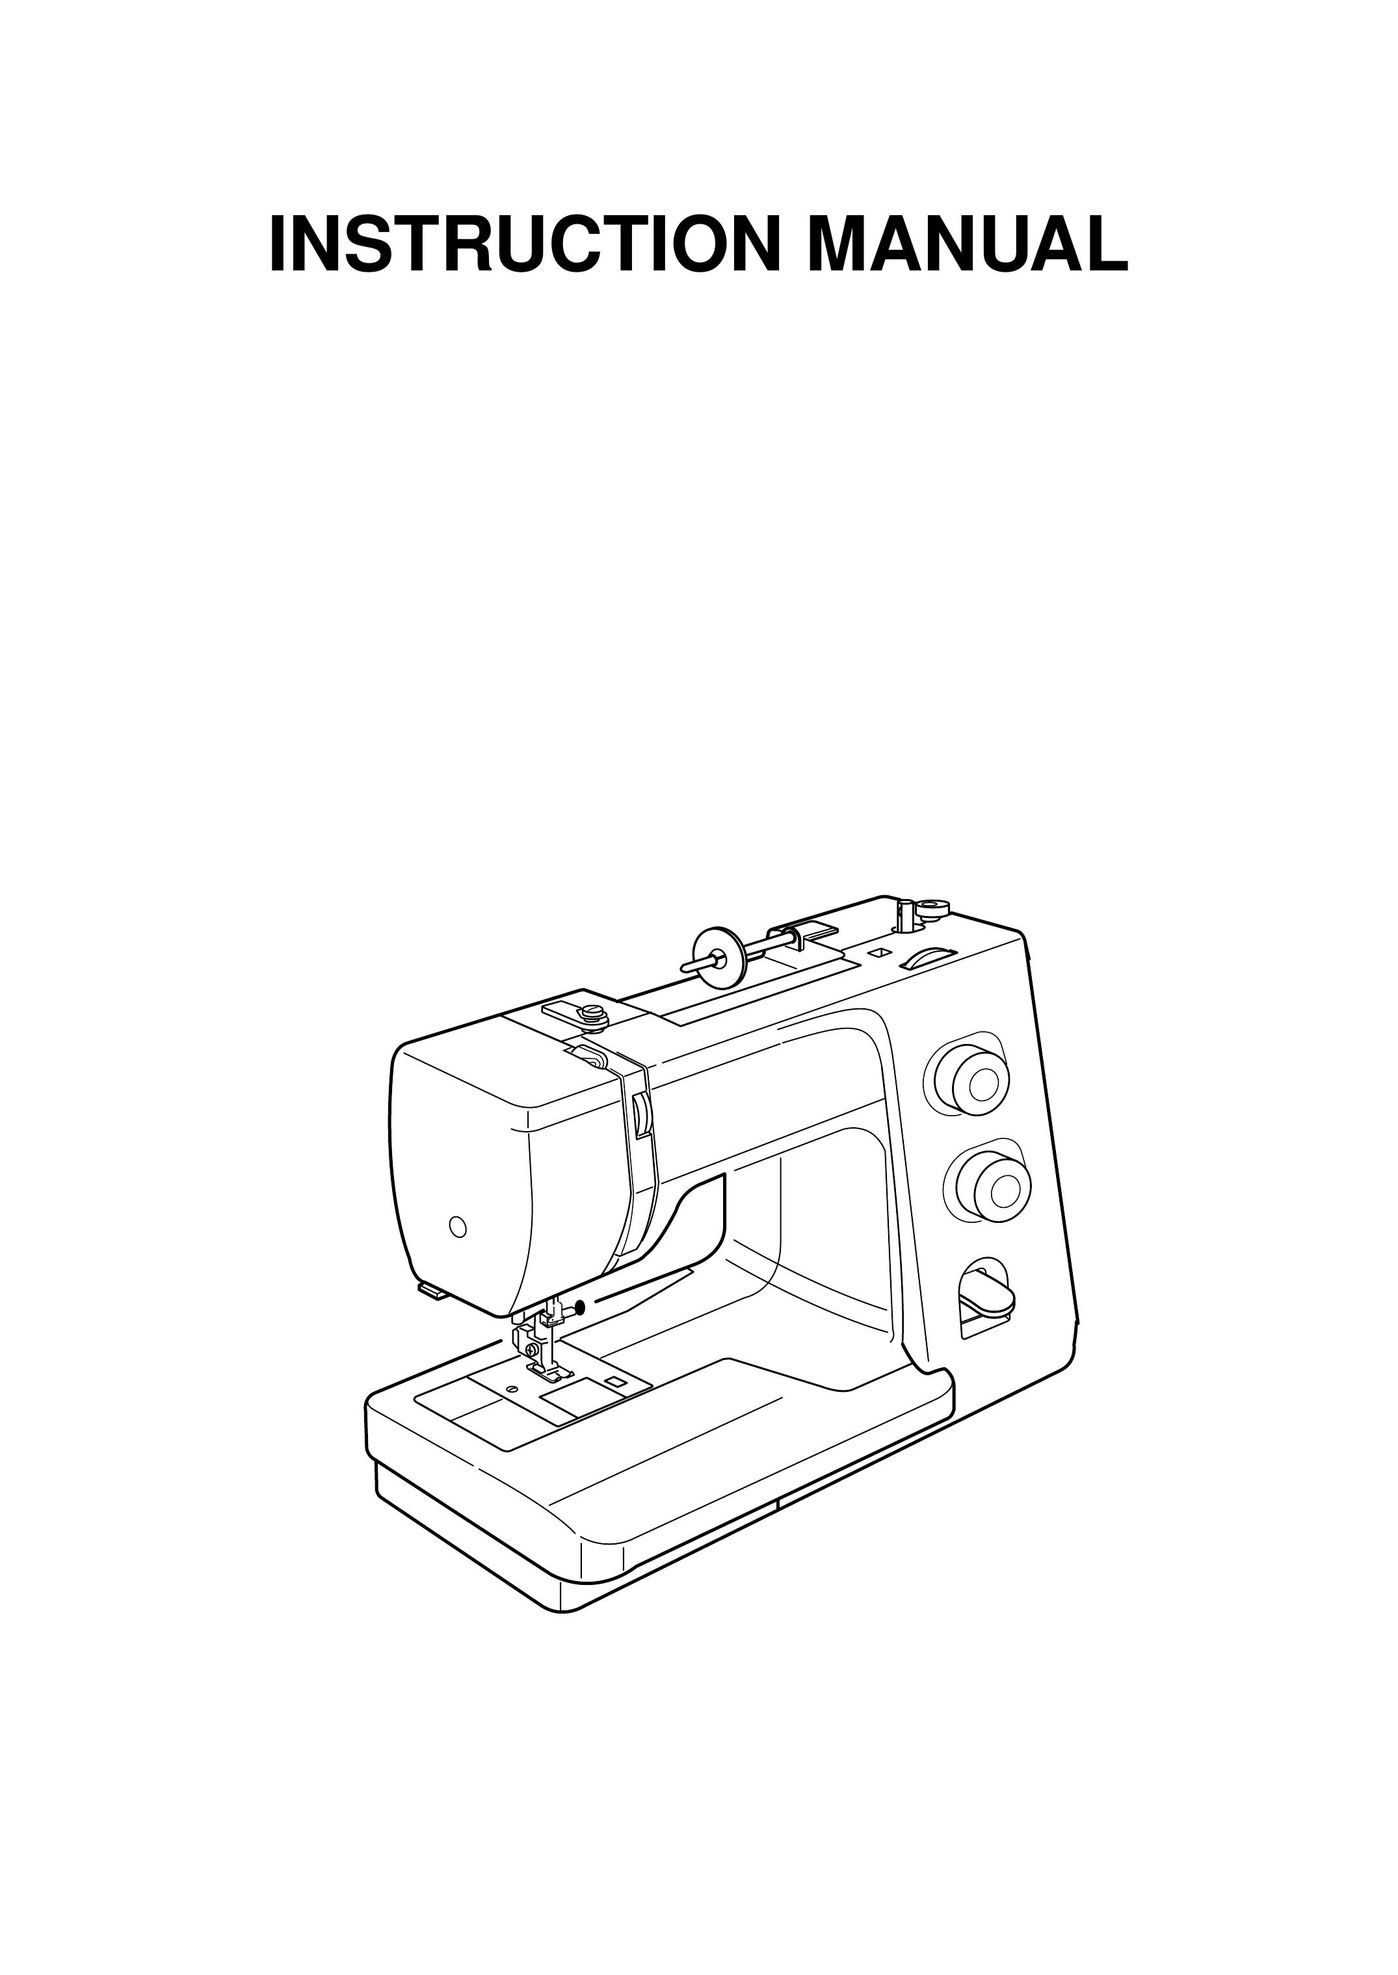 3D Connexion 7318 Sewing Machine User Manual